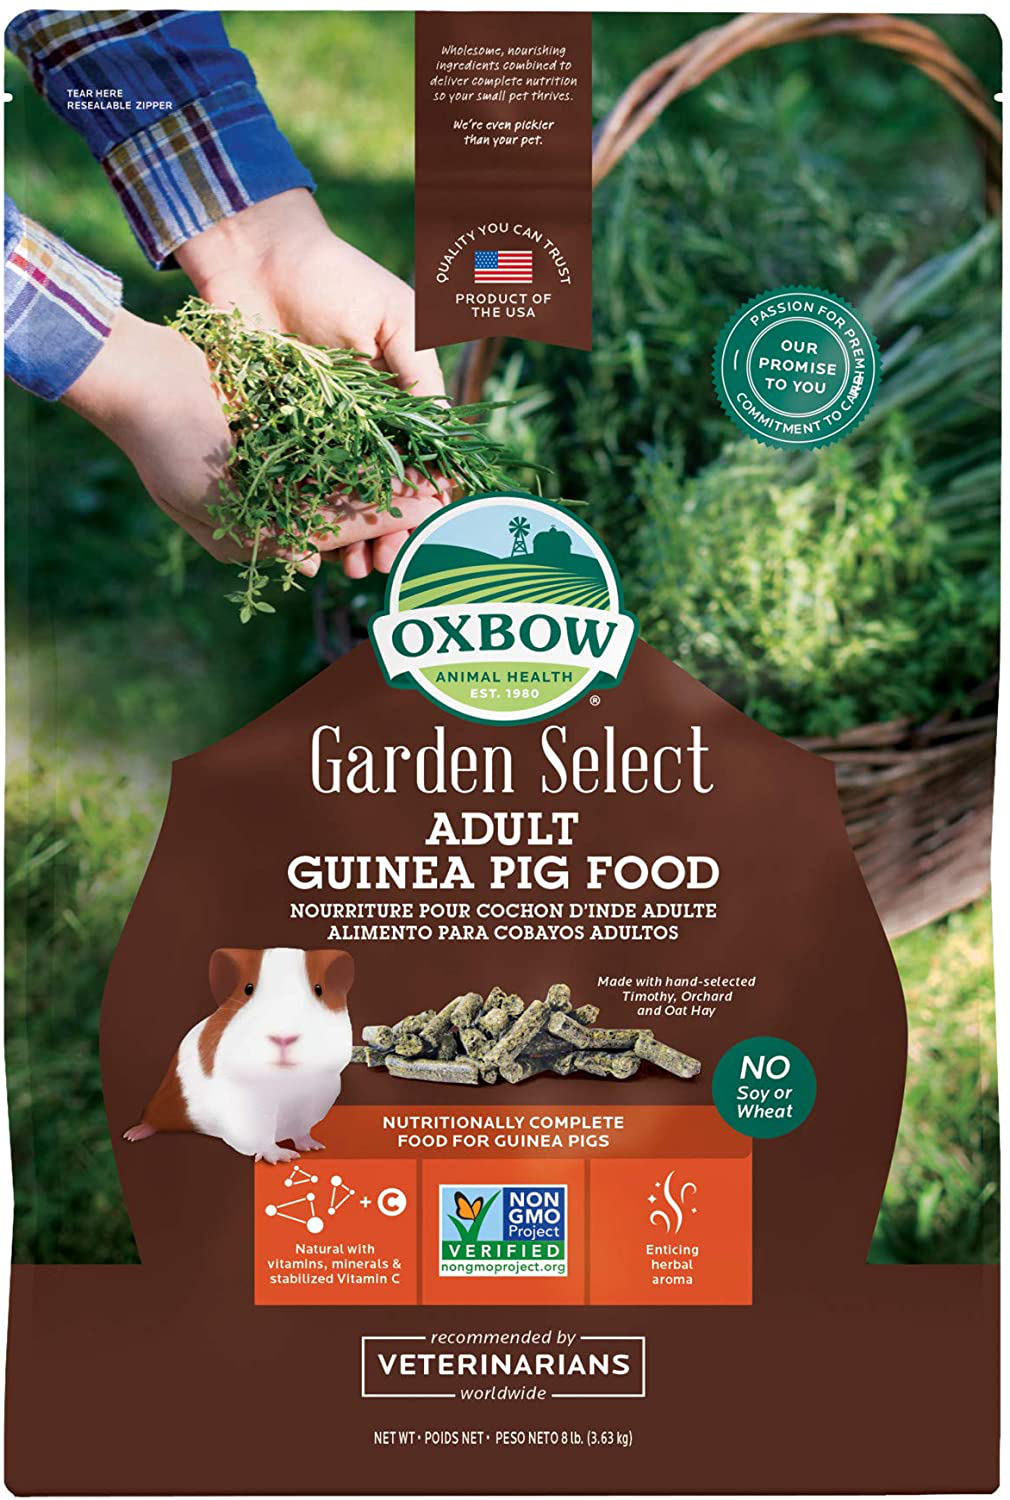 Oxbow Fortified Nutrition